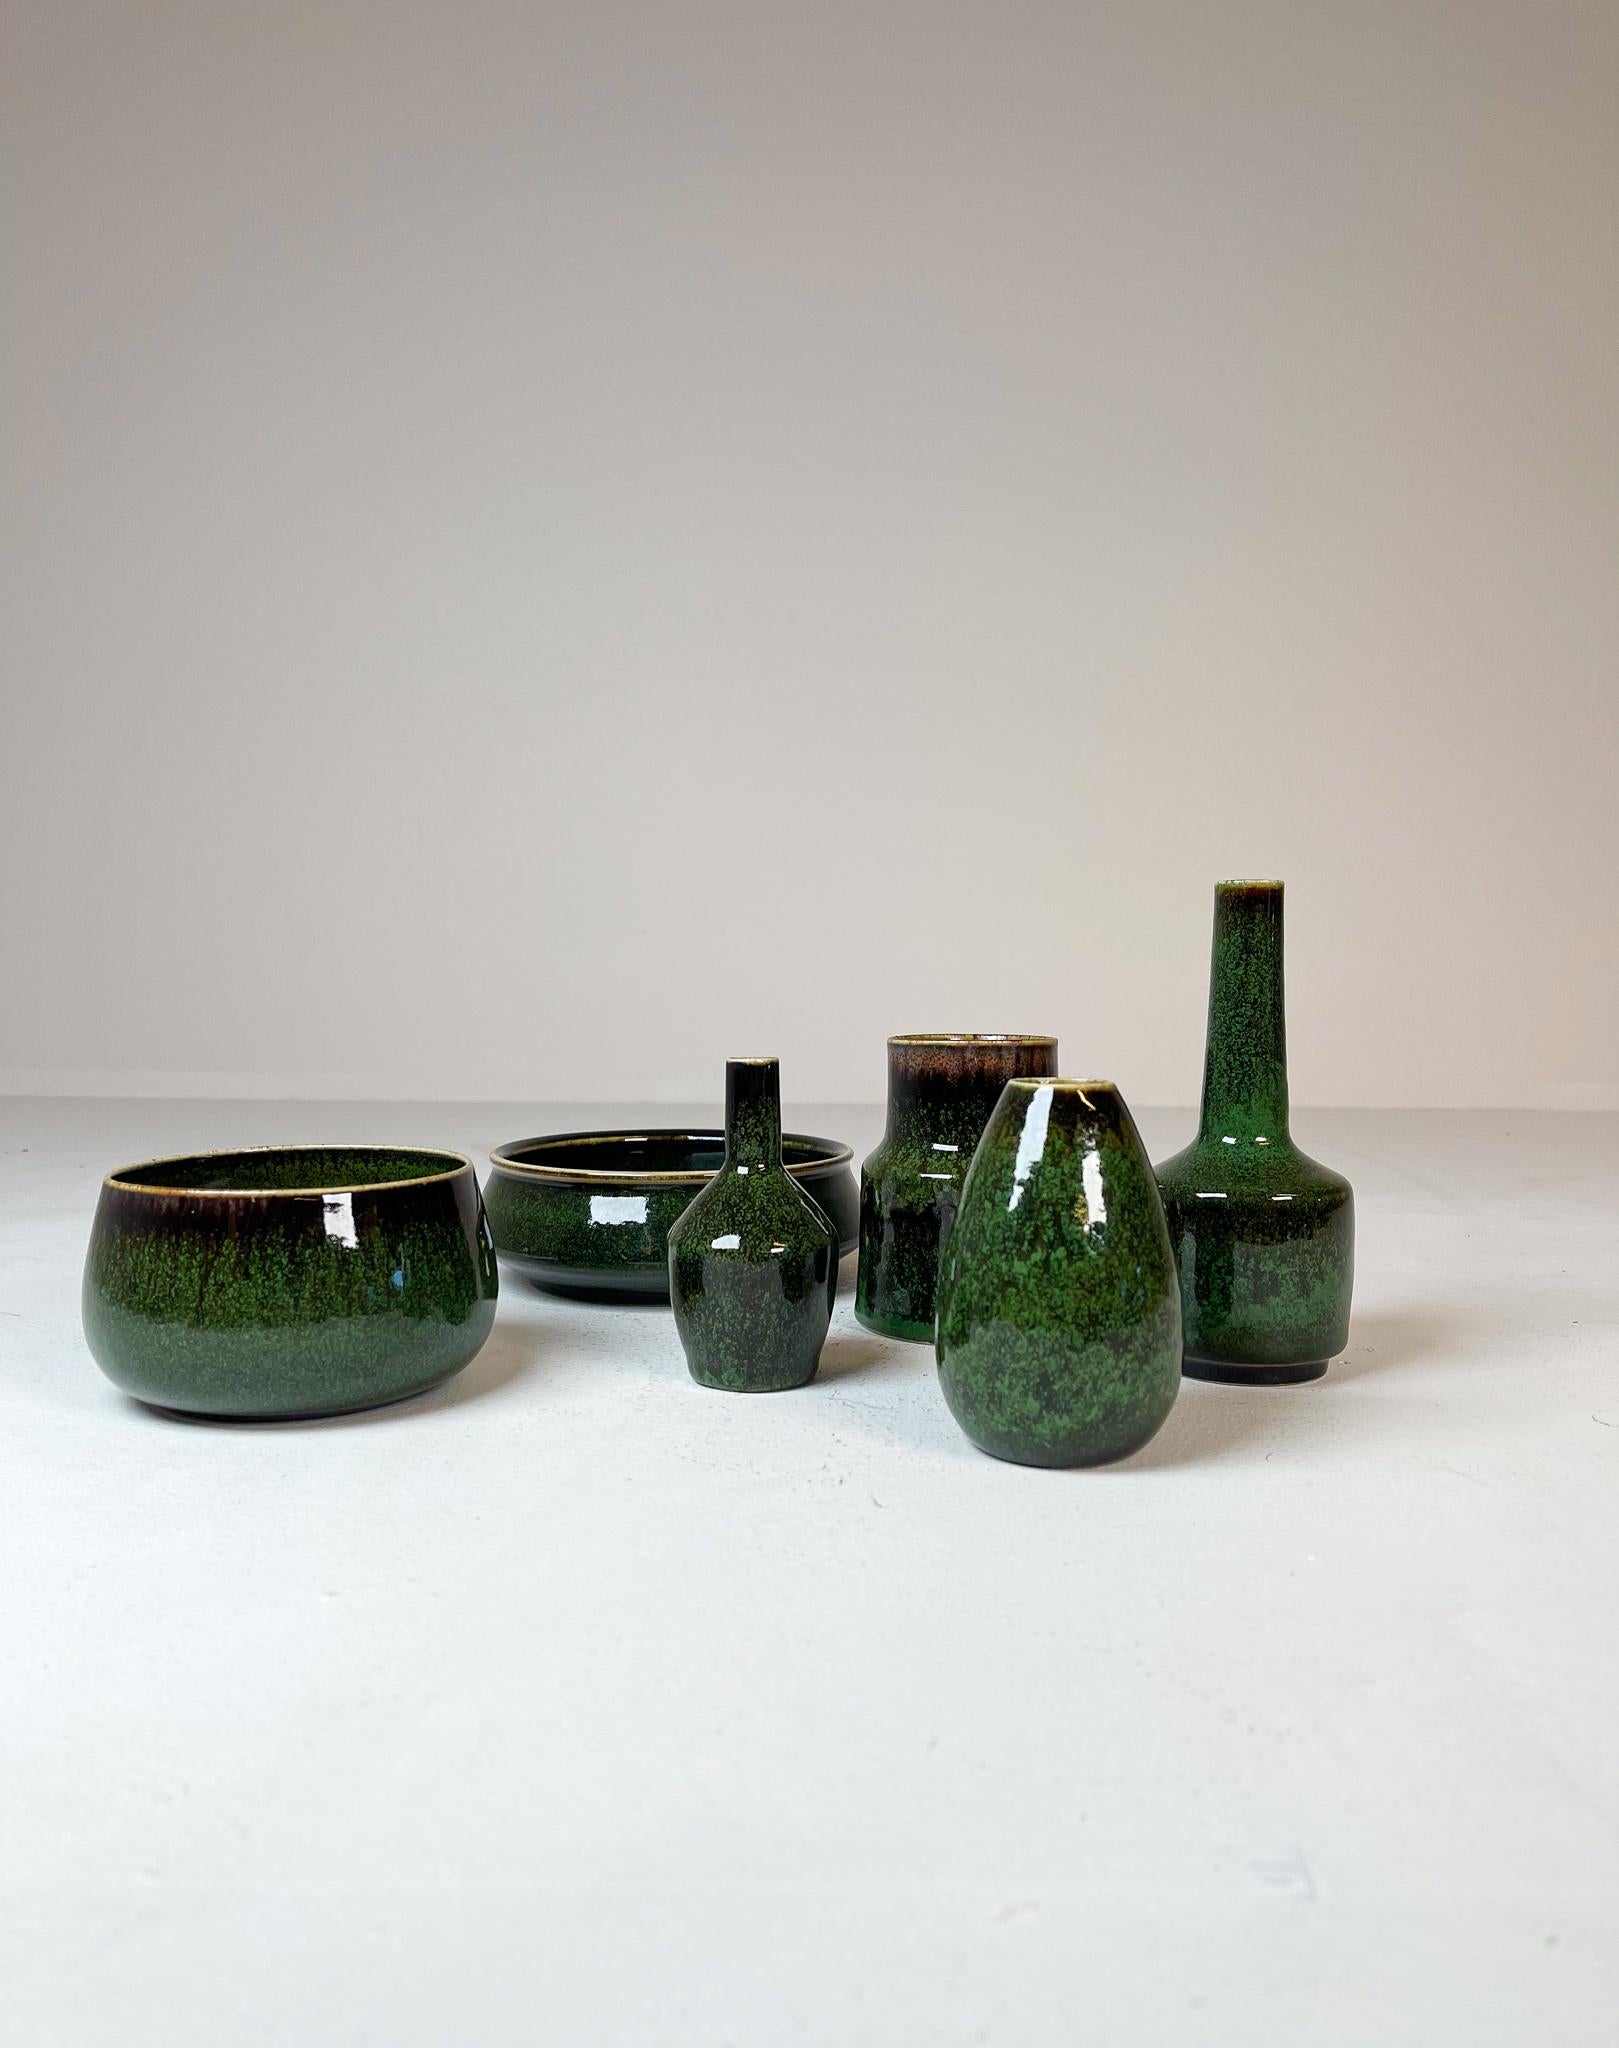 Collection of vases and bowls from Rörstrand and maker/Designer Stålhane. Made in Sweden in the mid-century. Beautiful, glazed vases in good condition. This set of green vases and bowls are nice edition to any modern home. 

Dimensions: Vase’s